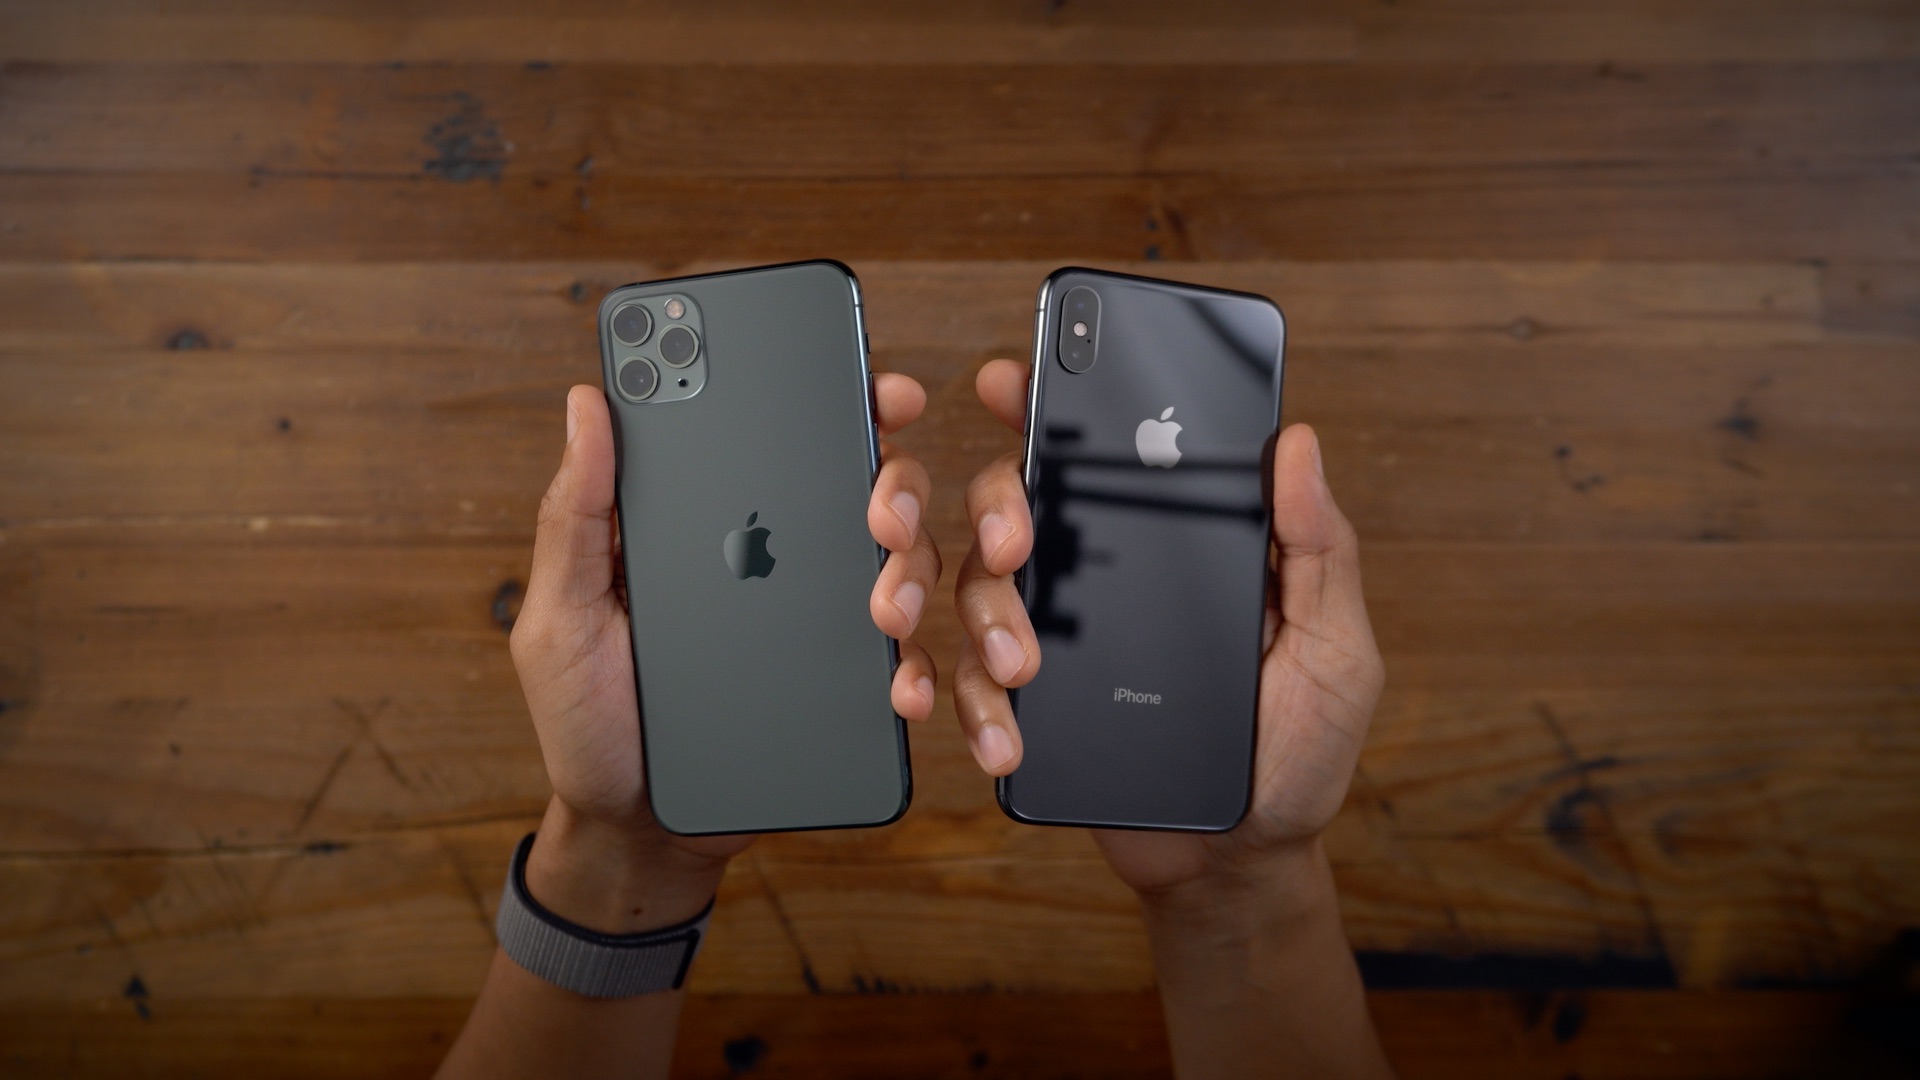 iPhone X review: This iPhone XS predecessor is still a contender